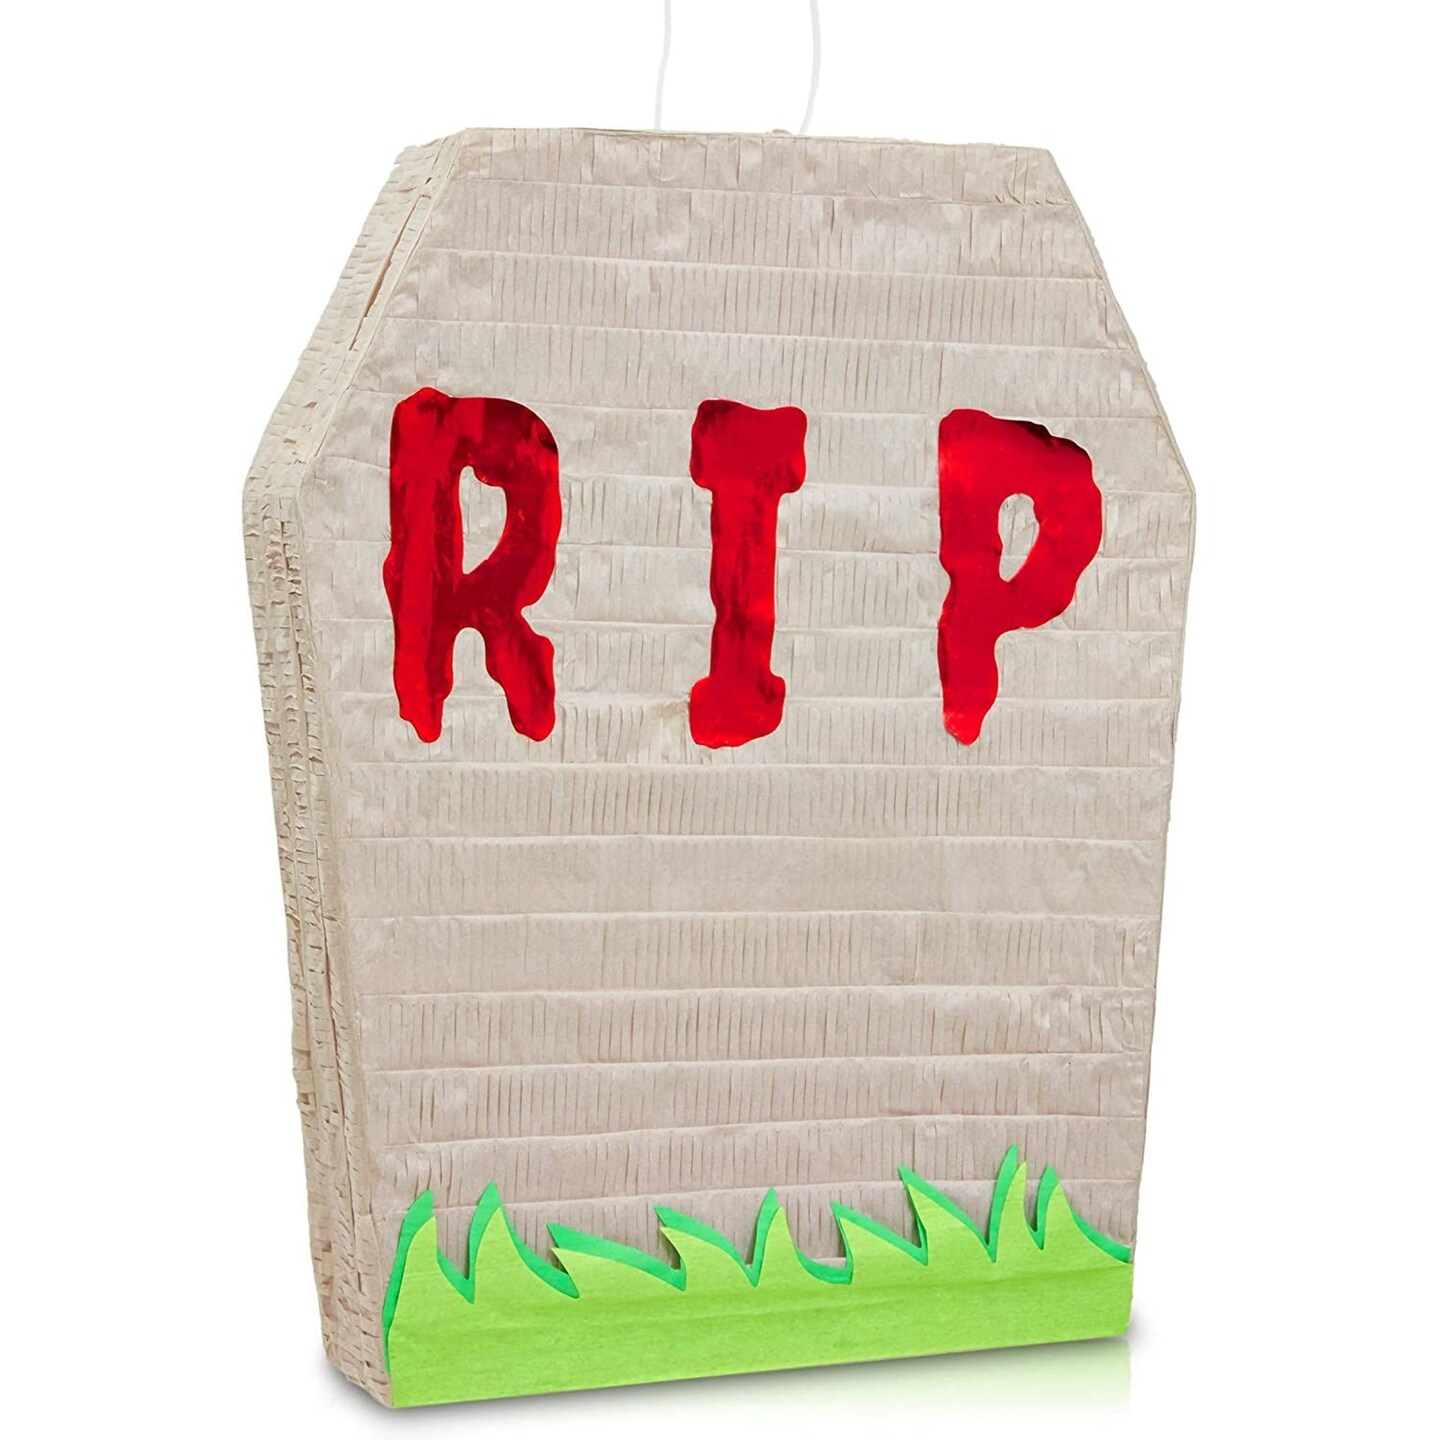 Graveyard Tombstone RIP Pinata for Halloween Party Supplies Decorations, 17 x 13 x 3 In